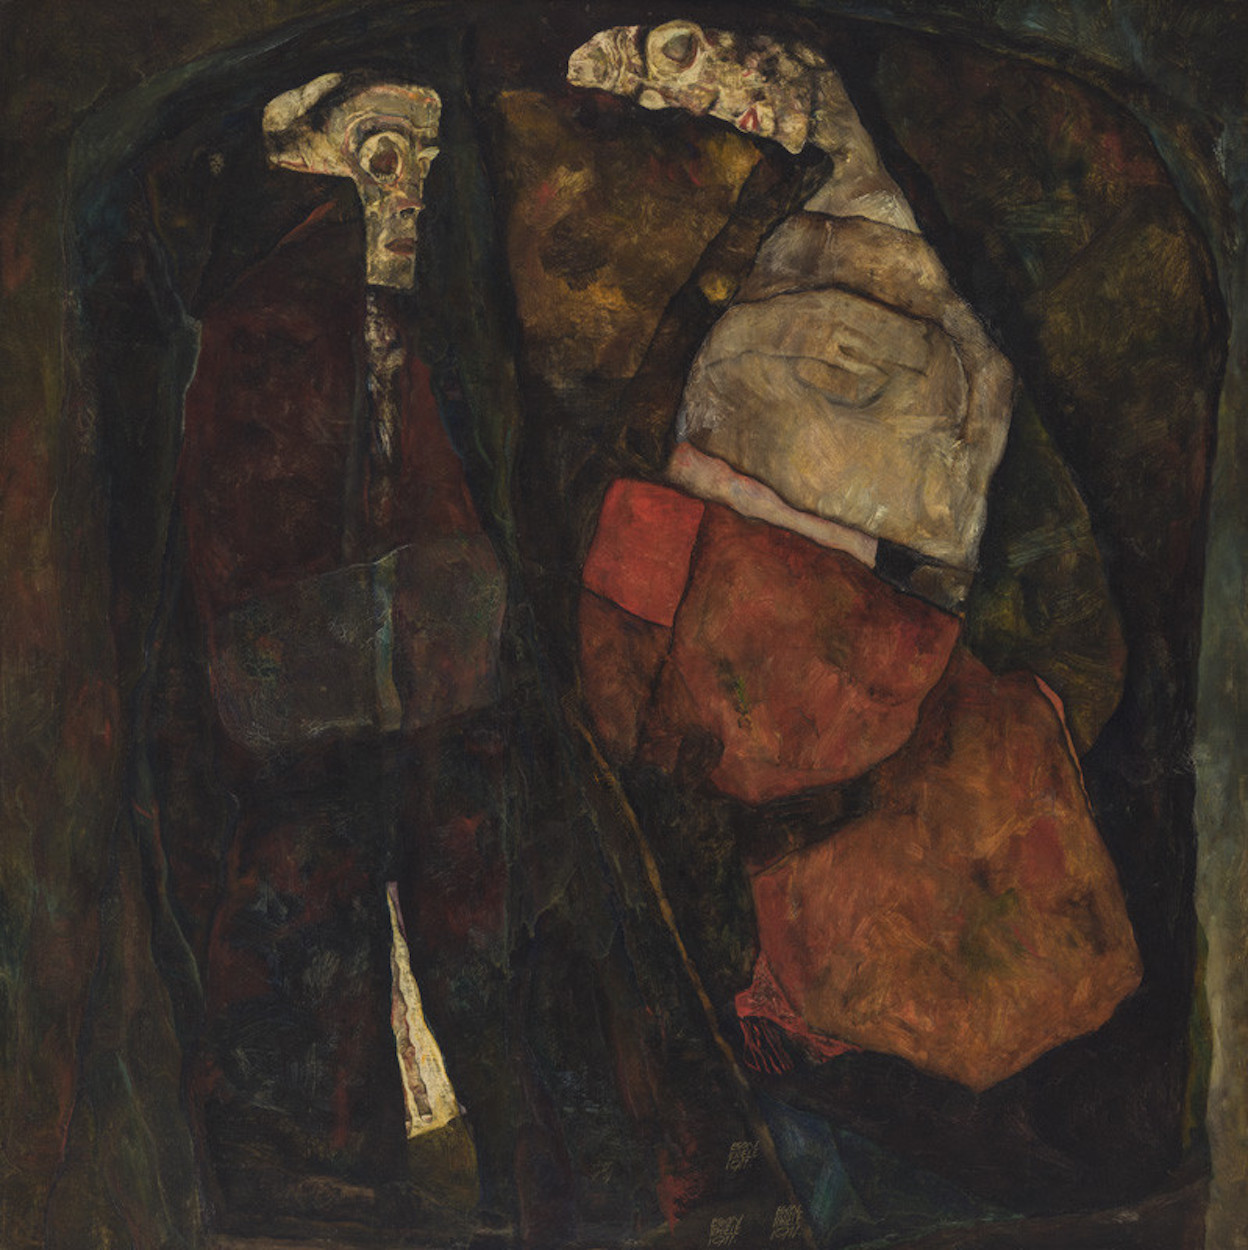 Pregnant Woman and Death (Mother and Death) by Egon Schiele - 1911 - 100 x 100 cm National Gallery in Prague